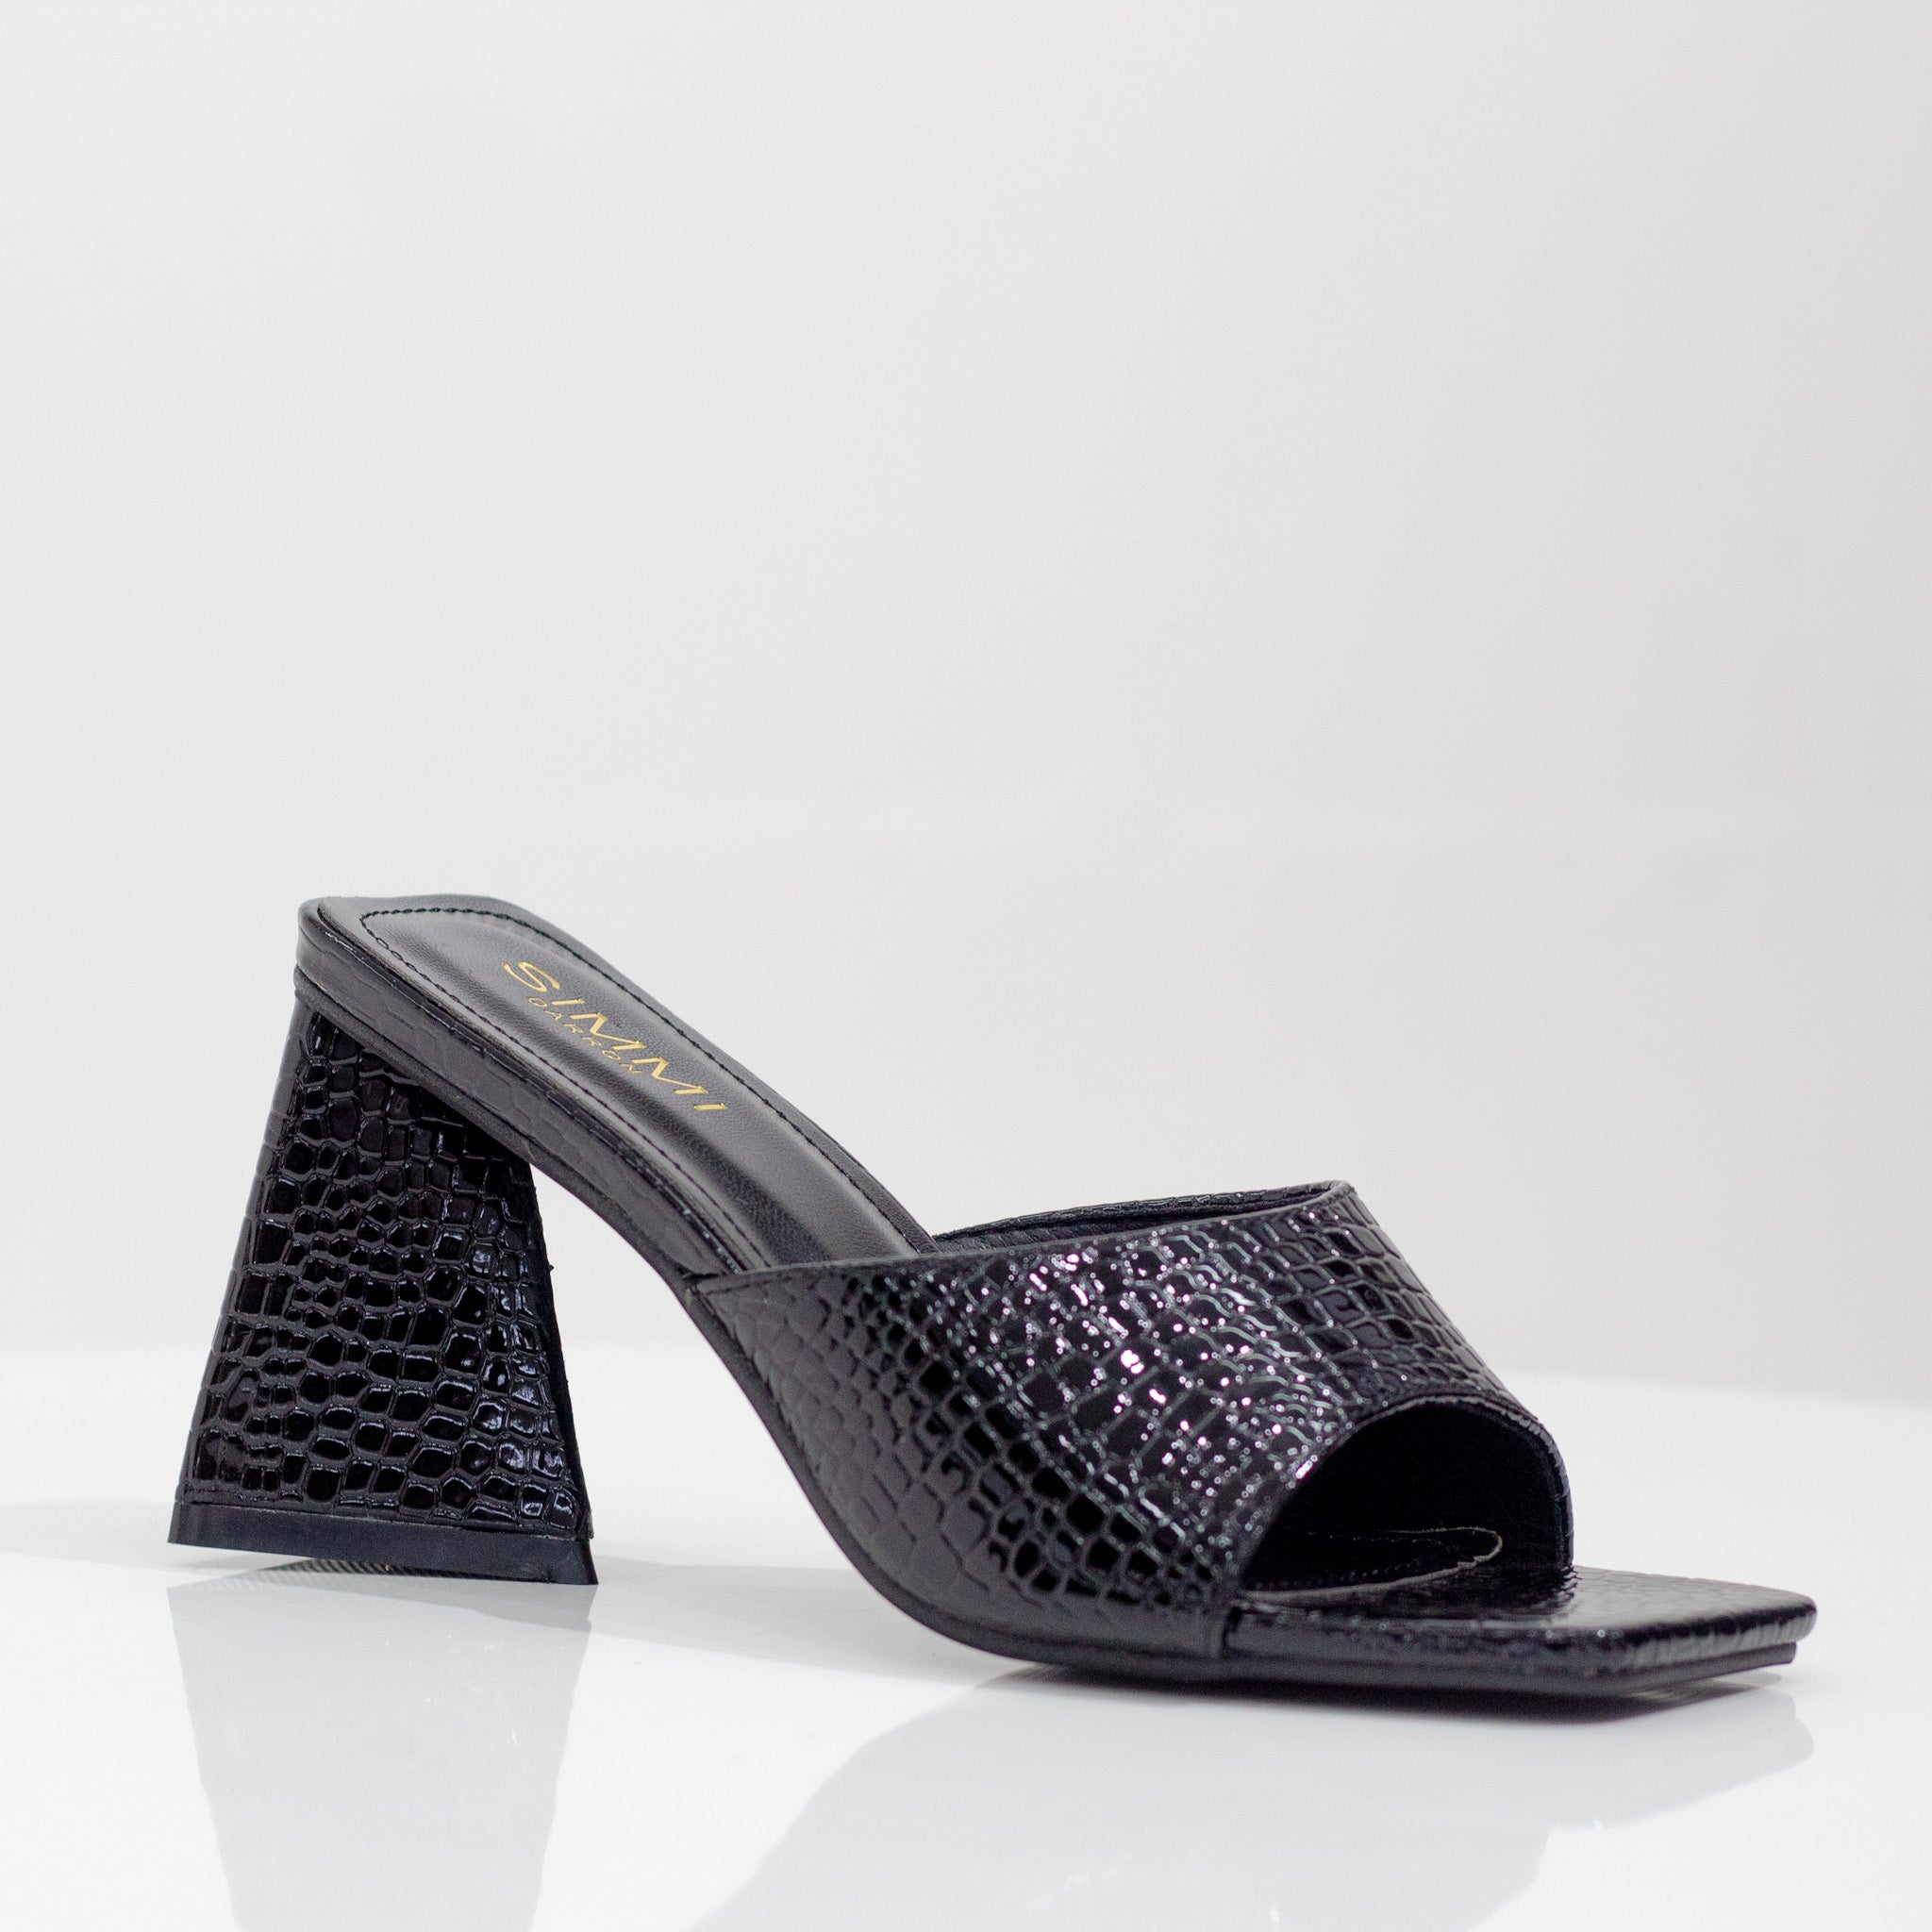 Qismat heels sandals for girls and womens in Black, Grey, and Brown Colours  in Suede Material